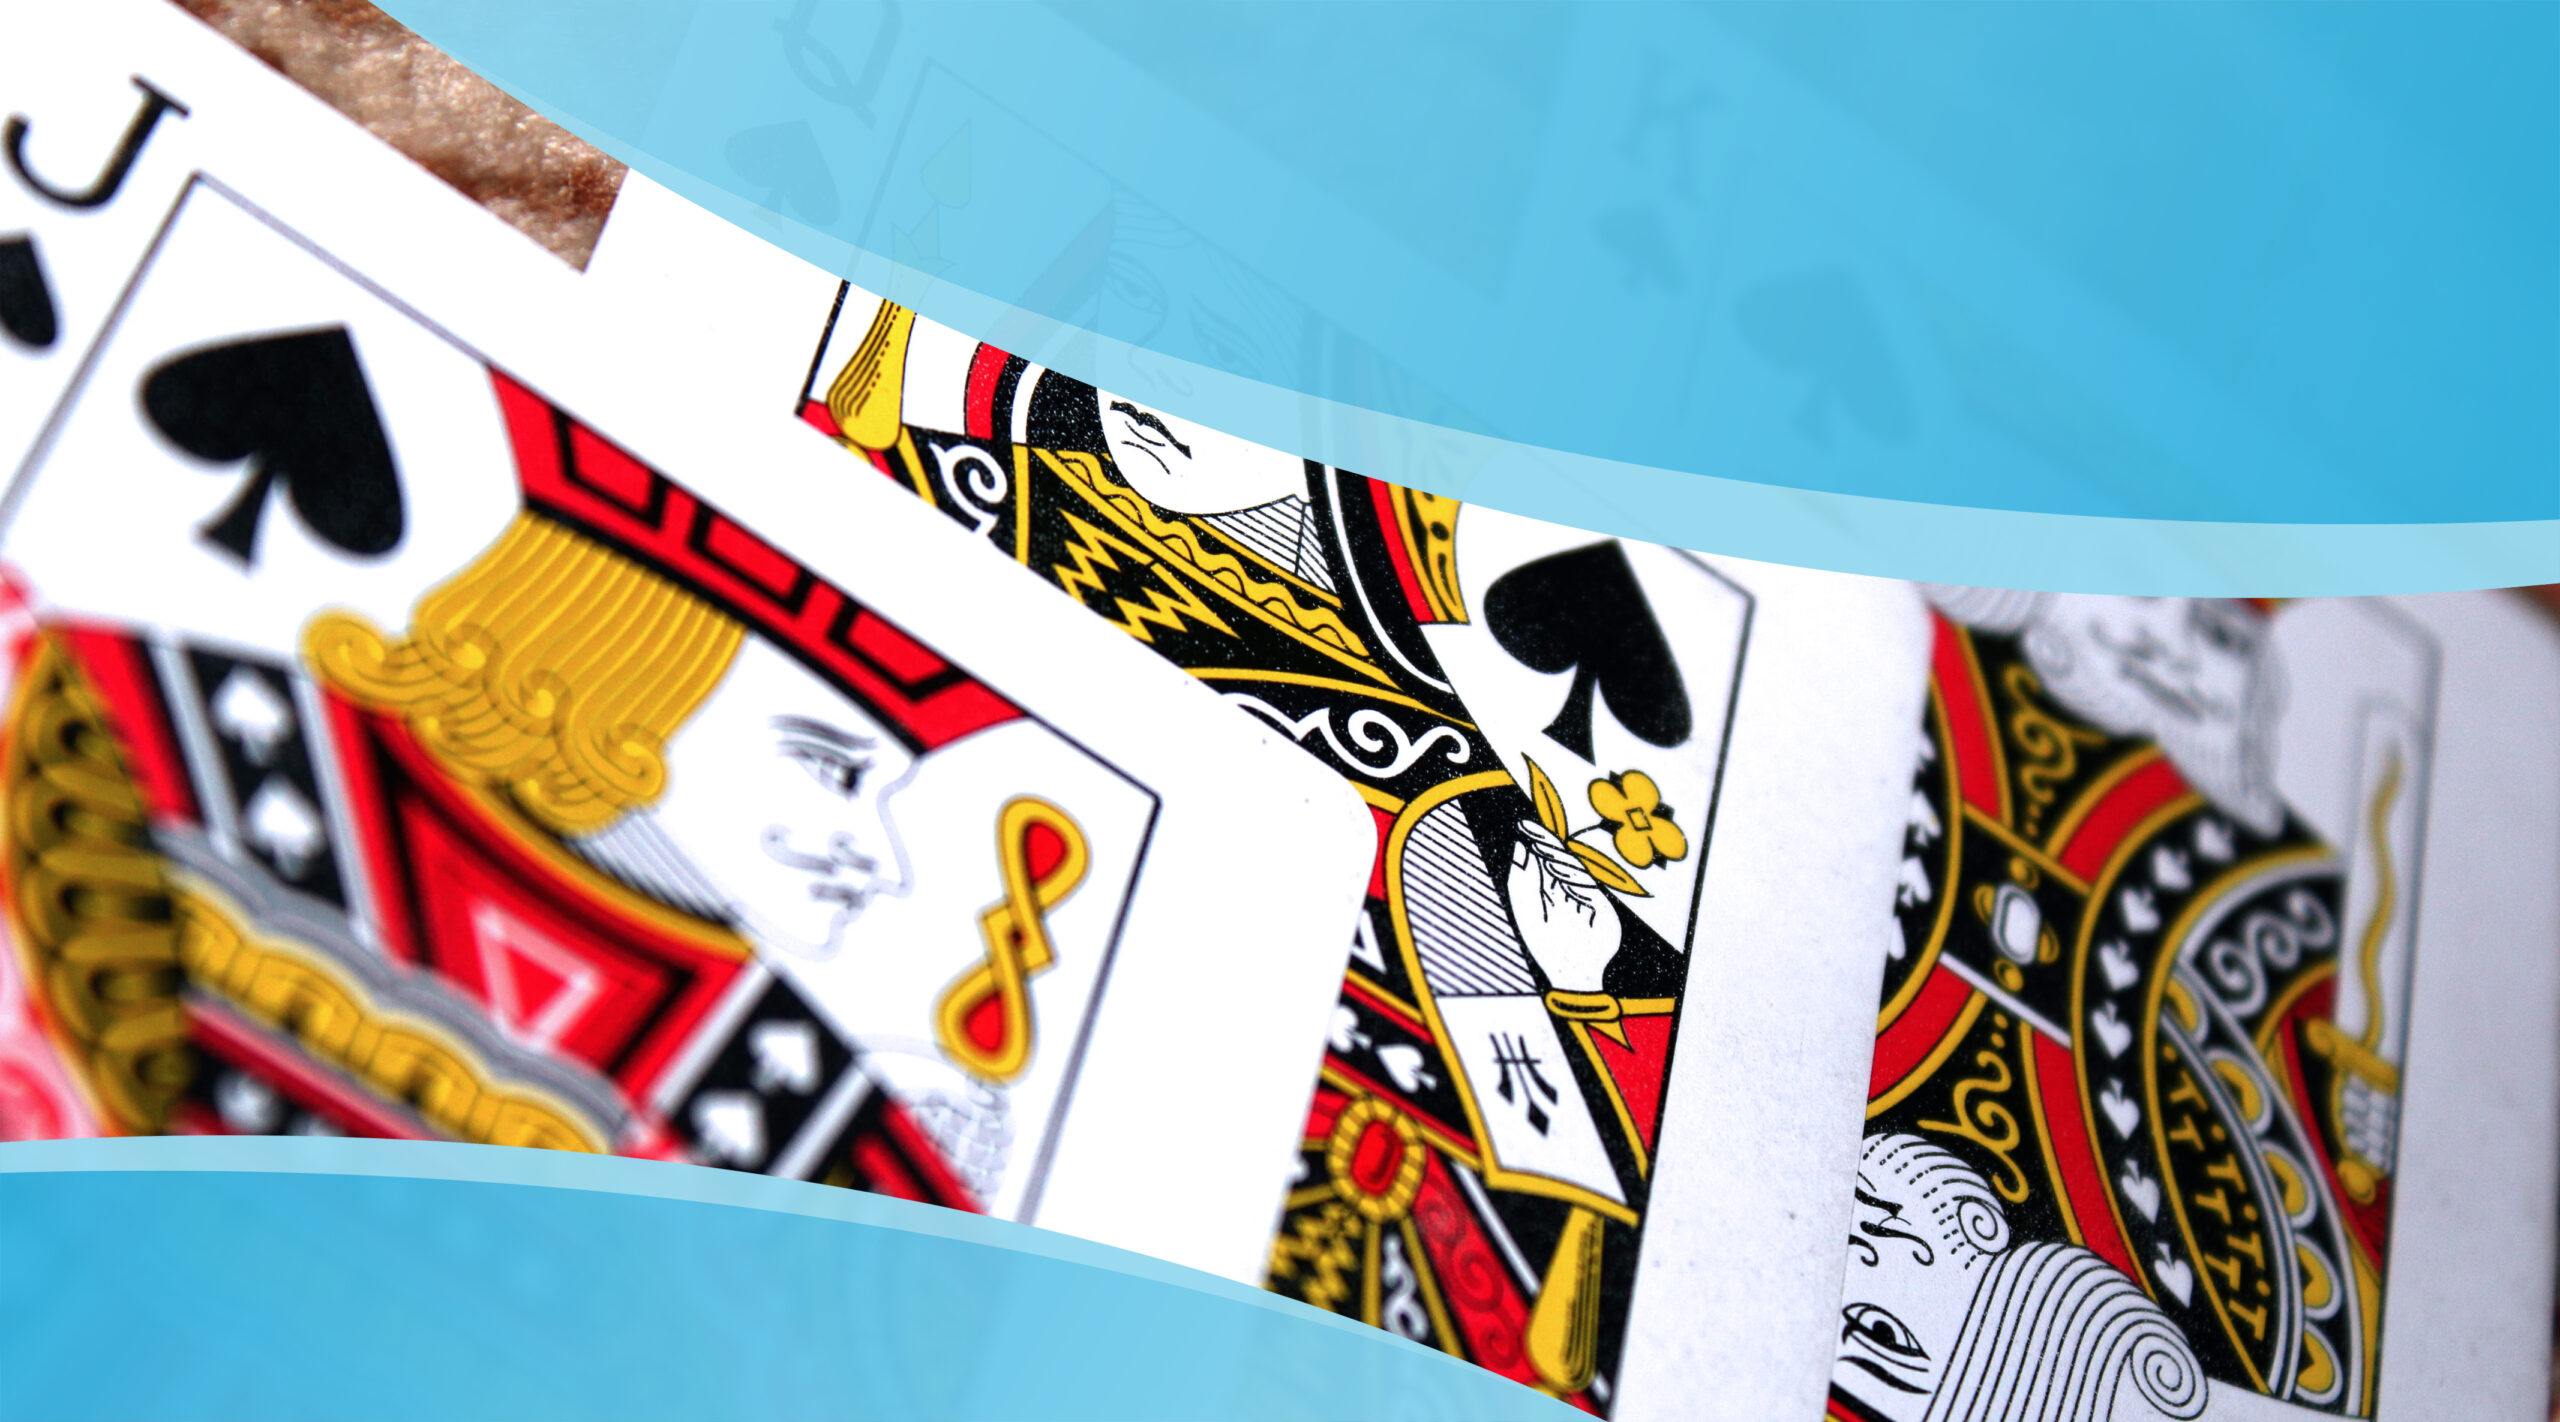 Header image for the blog post 'The Magic of Printing Custom Playing Cards' featuring a deck of custom-designed playing cards with intricate artwork and captivating visual elements